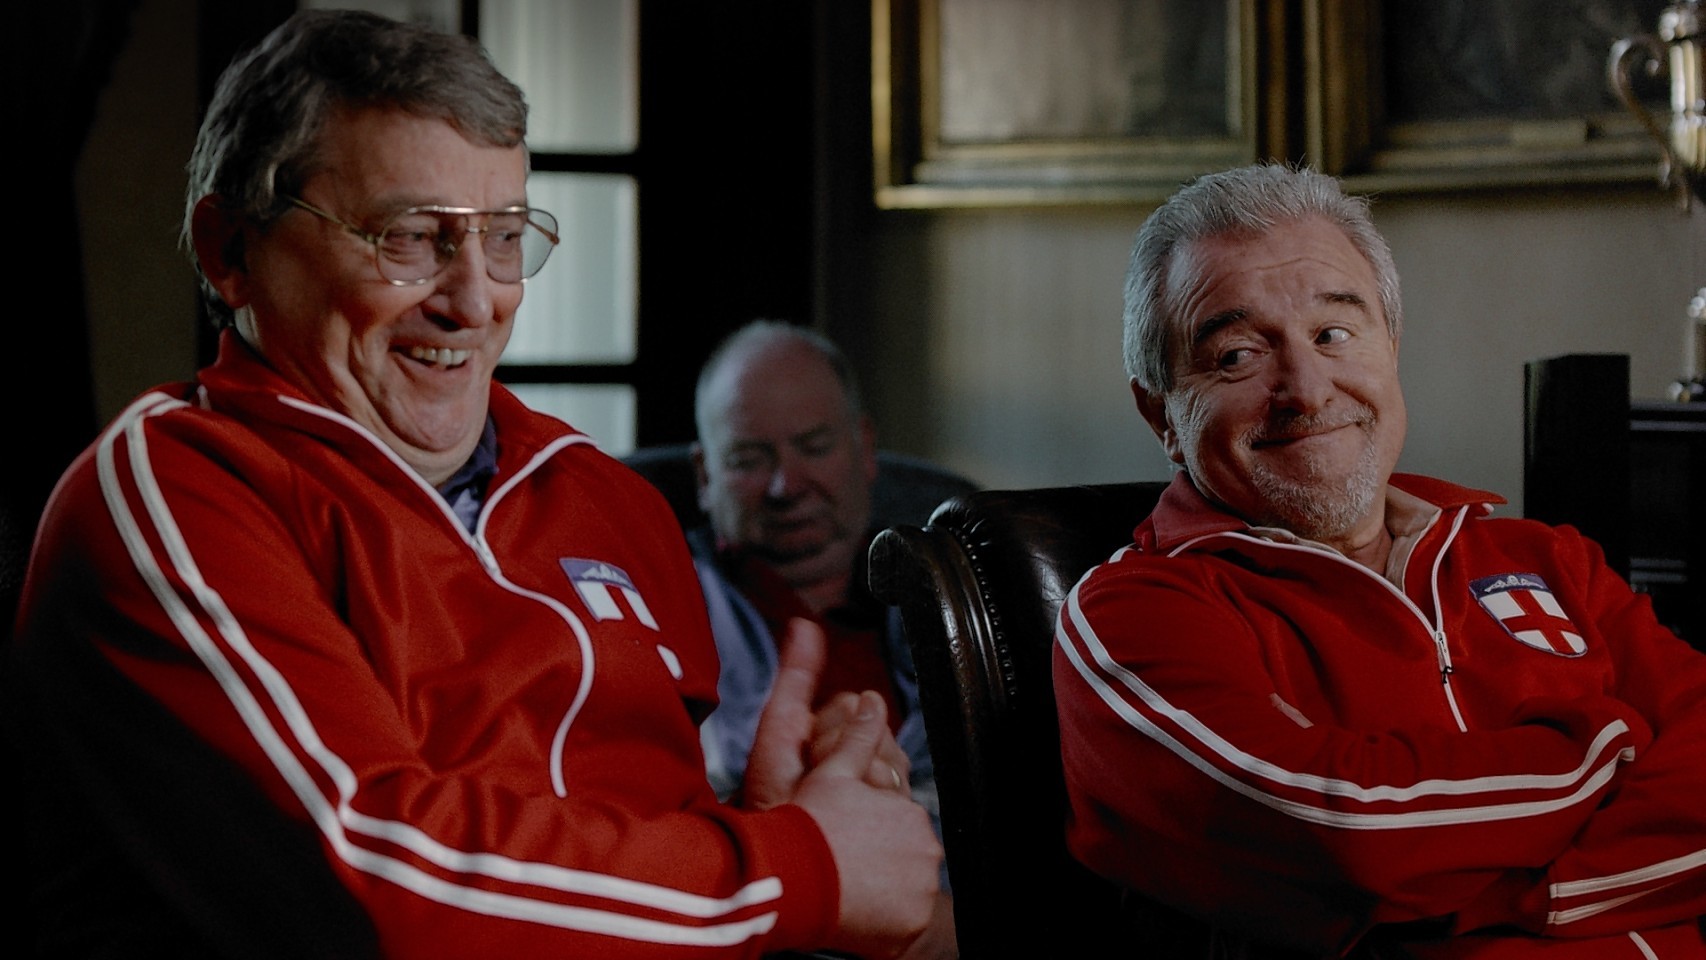 Terry Venables, right, with another former England manager, GrahamTaylor,in a 2010 TV advertisement